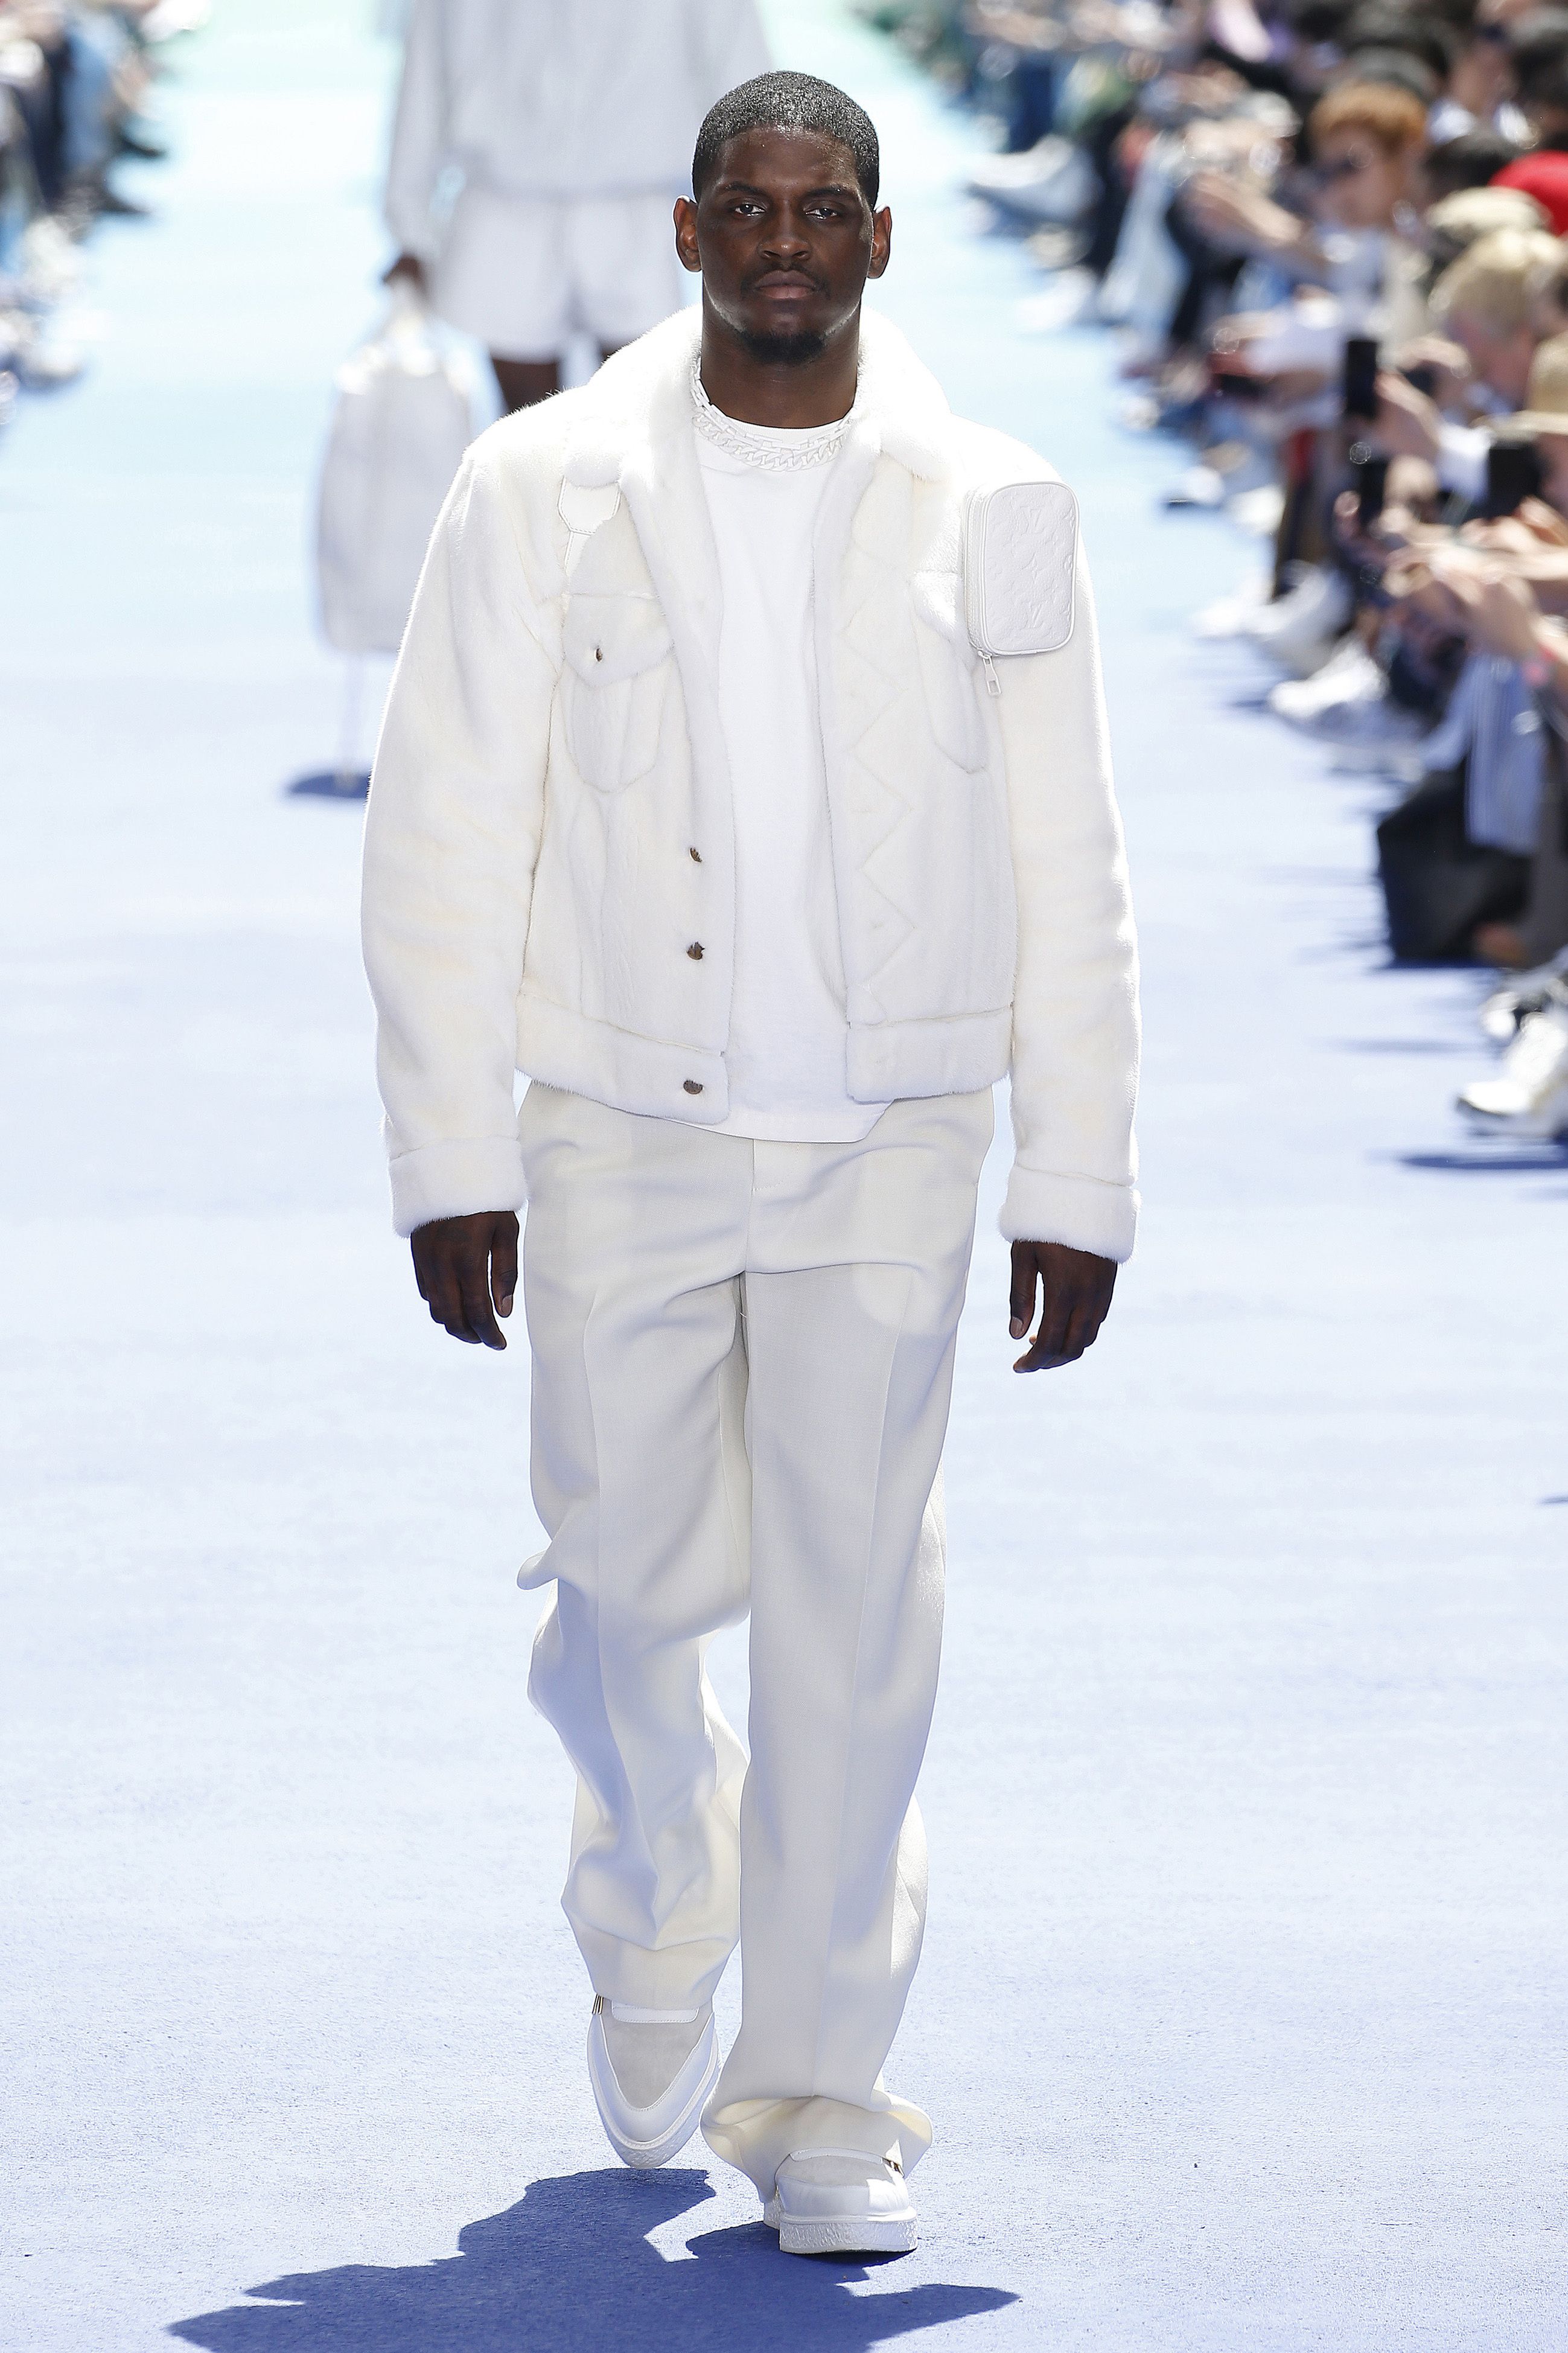 UPDATED: A First Look at Virgil Abloh's Debut Louis Vuitton Release